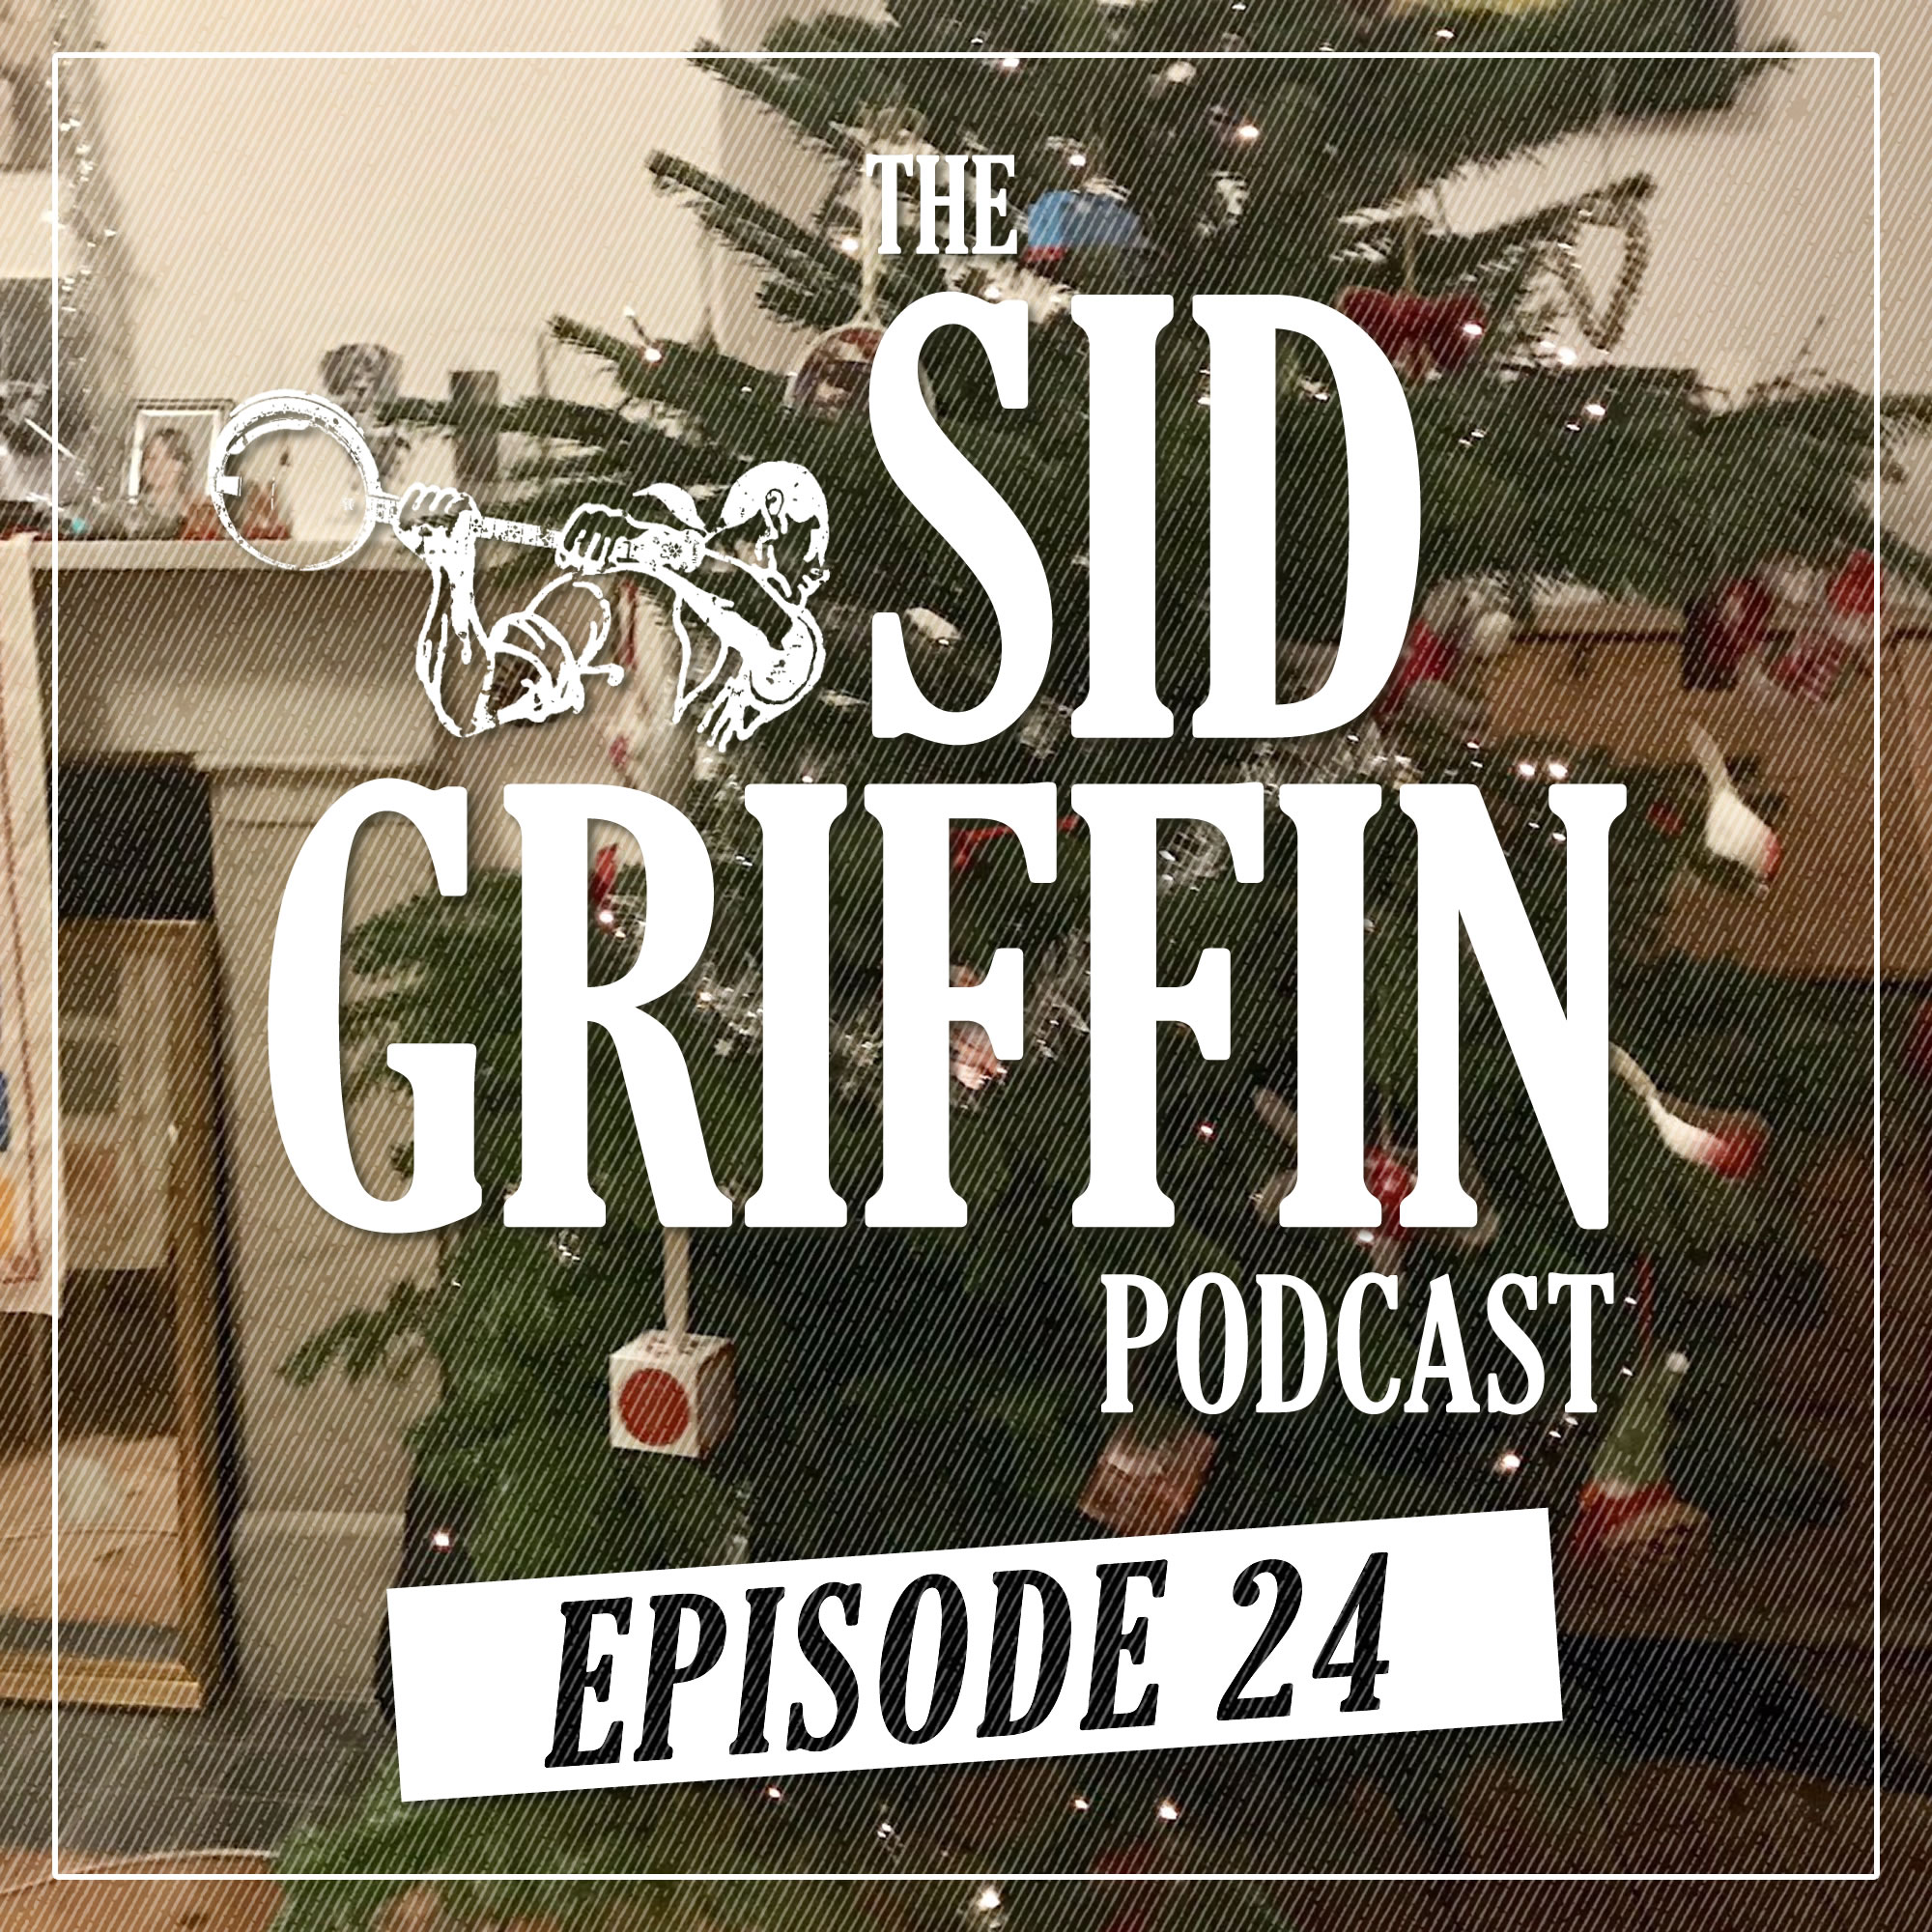 The Sid Griffin Podcast - Call All Coal Porters - Show 24